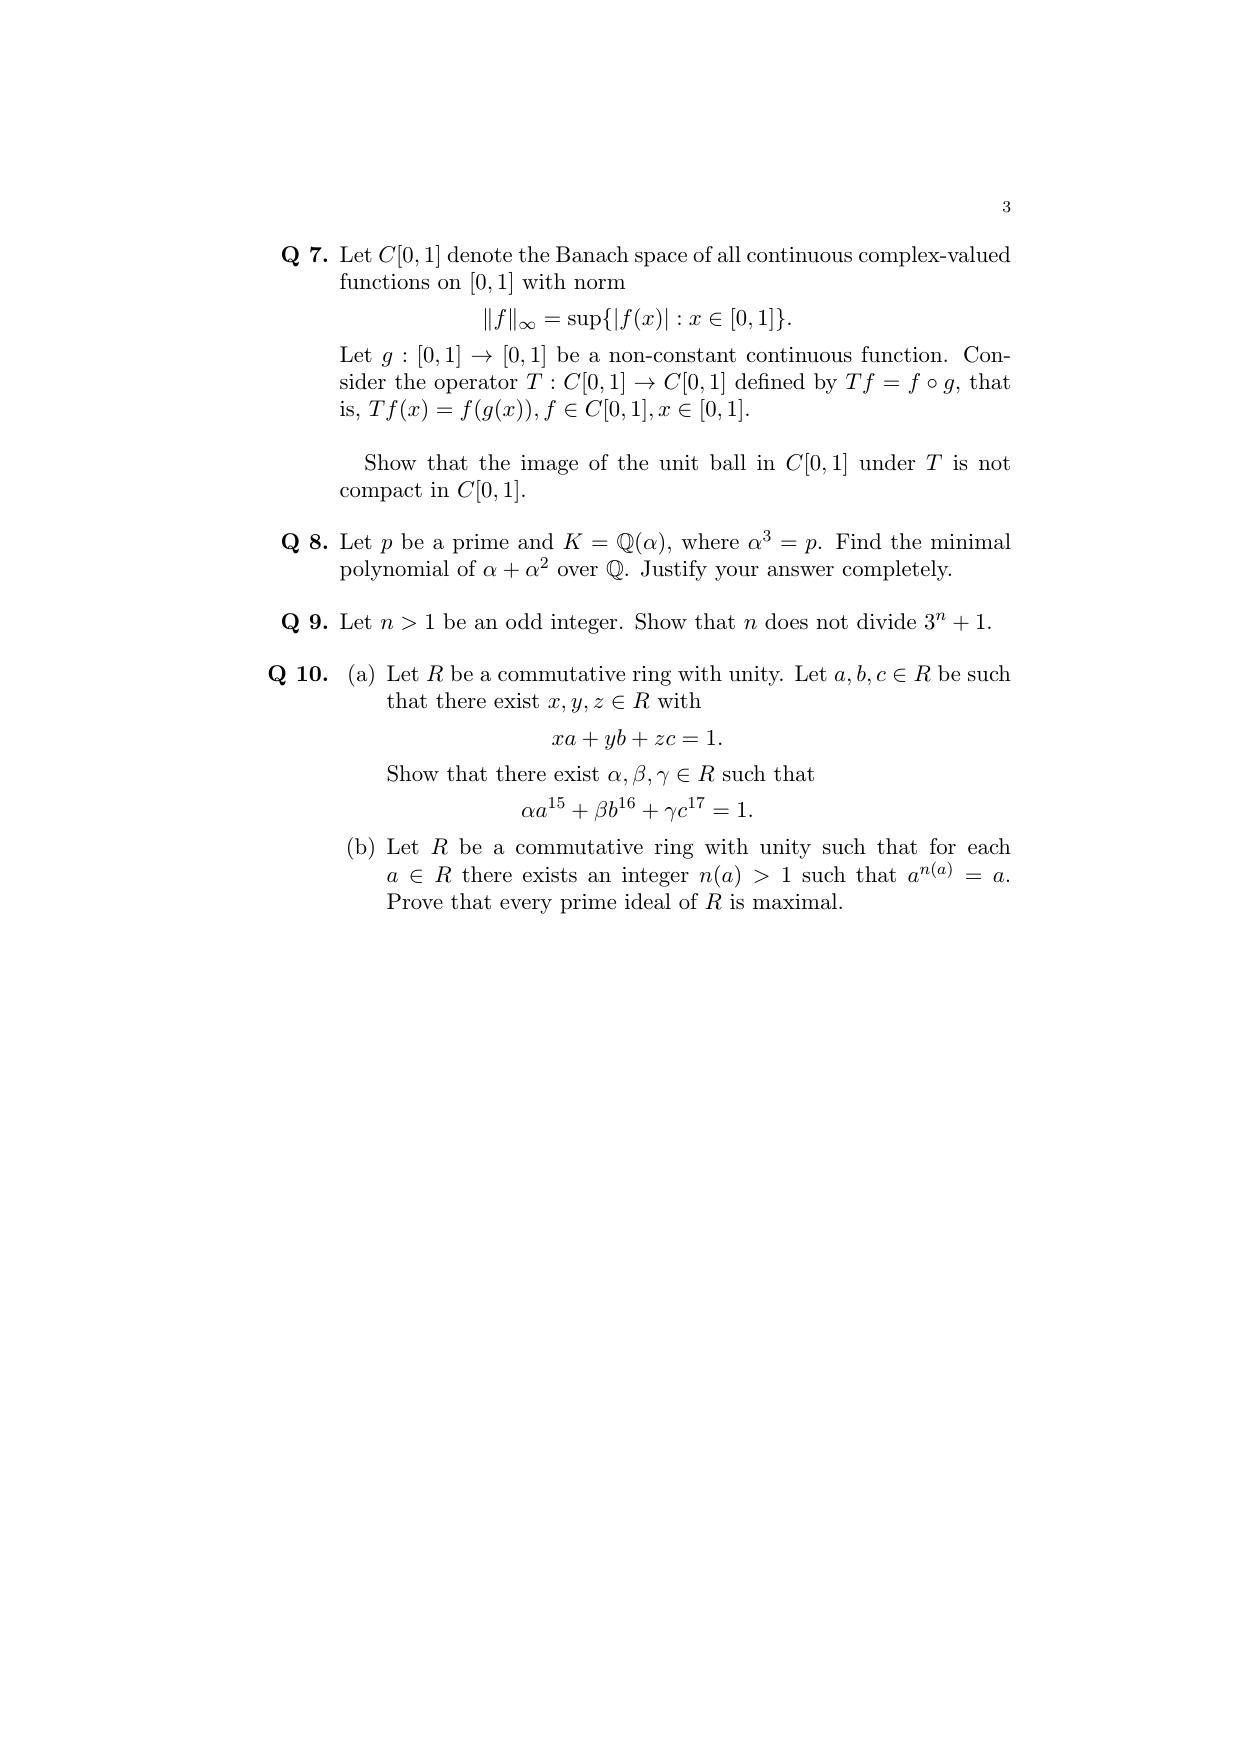 ISI Admission Test JRF in Mathematics MTB 2015 Sample Paper - Page 2